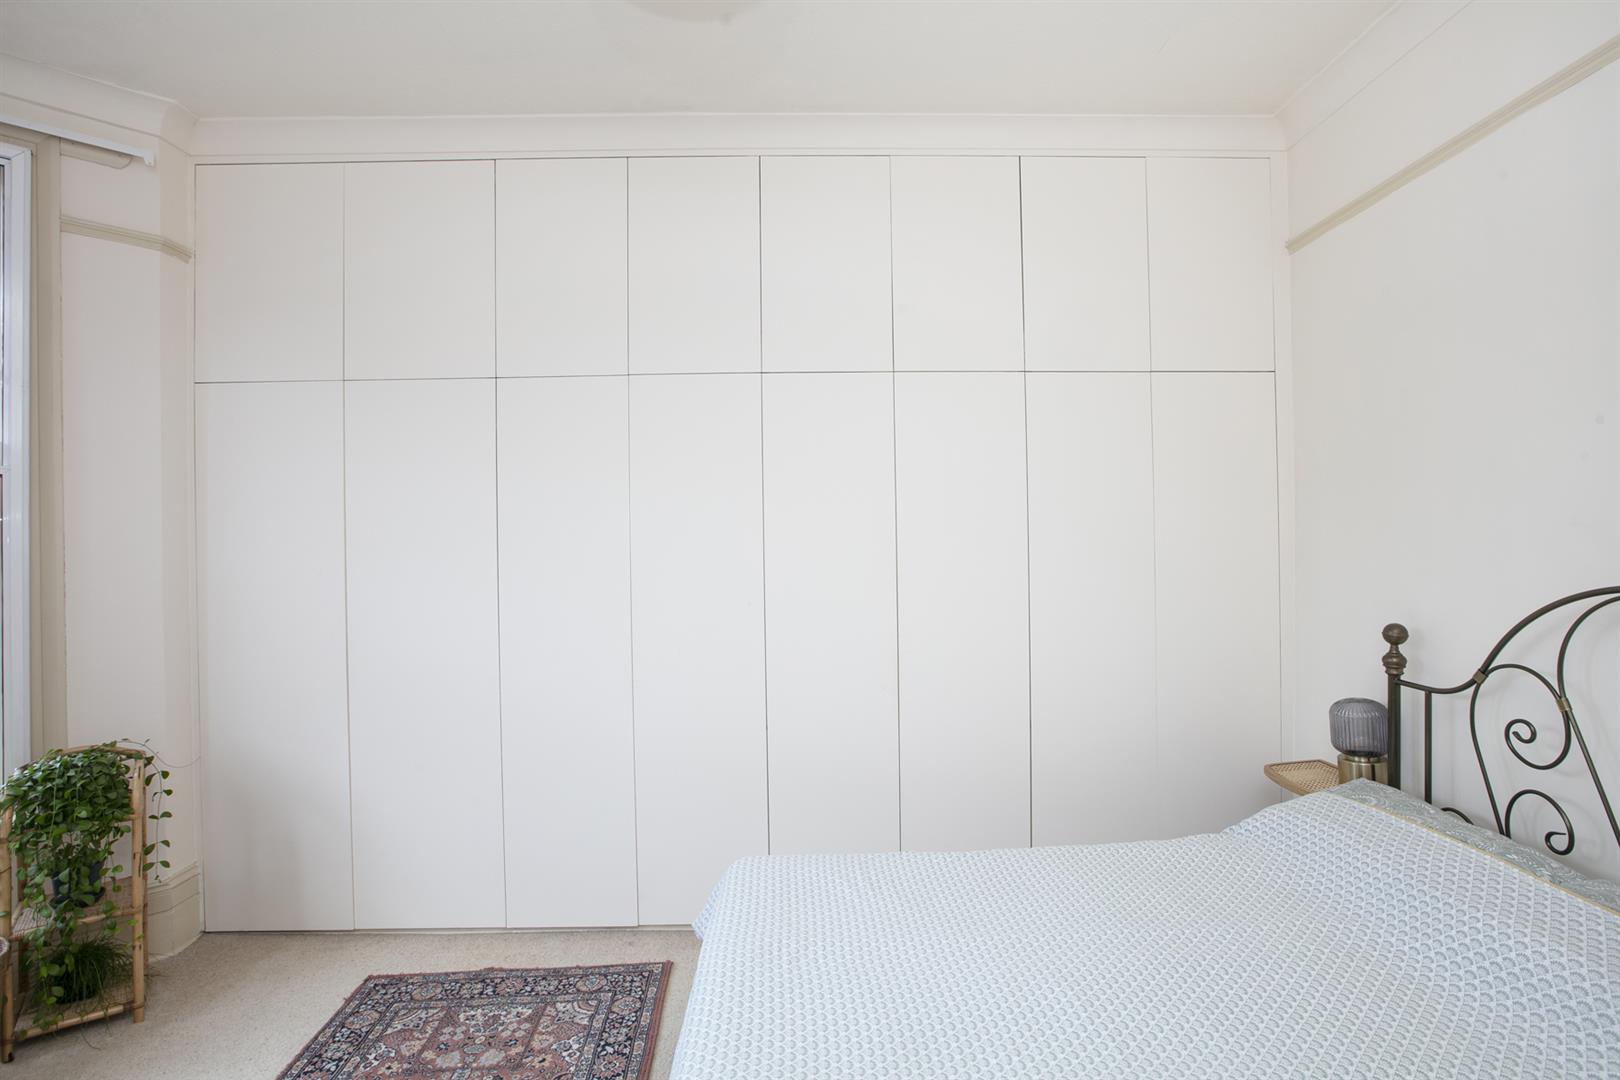 Flat - Conversion For Sale in Peckham Road, Camberwell, SE5 859 view9